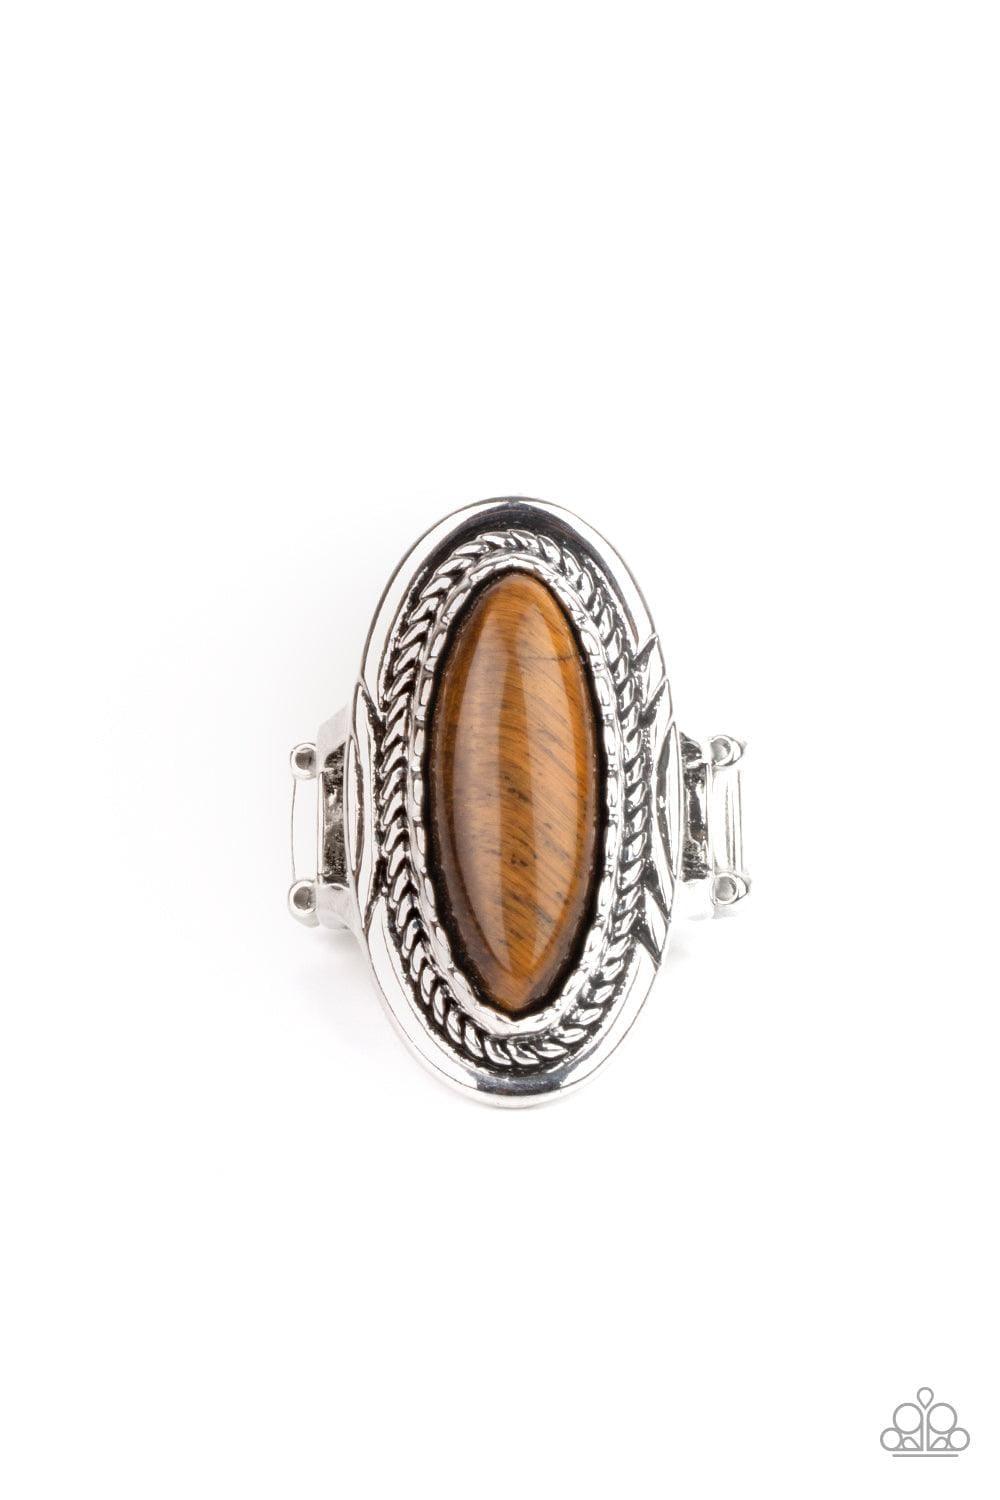 Paparazzi Accessories - Primal Instincts - Brown Ring - Bling by JessieK